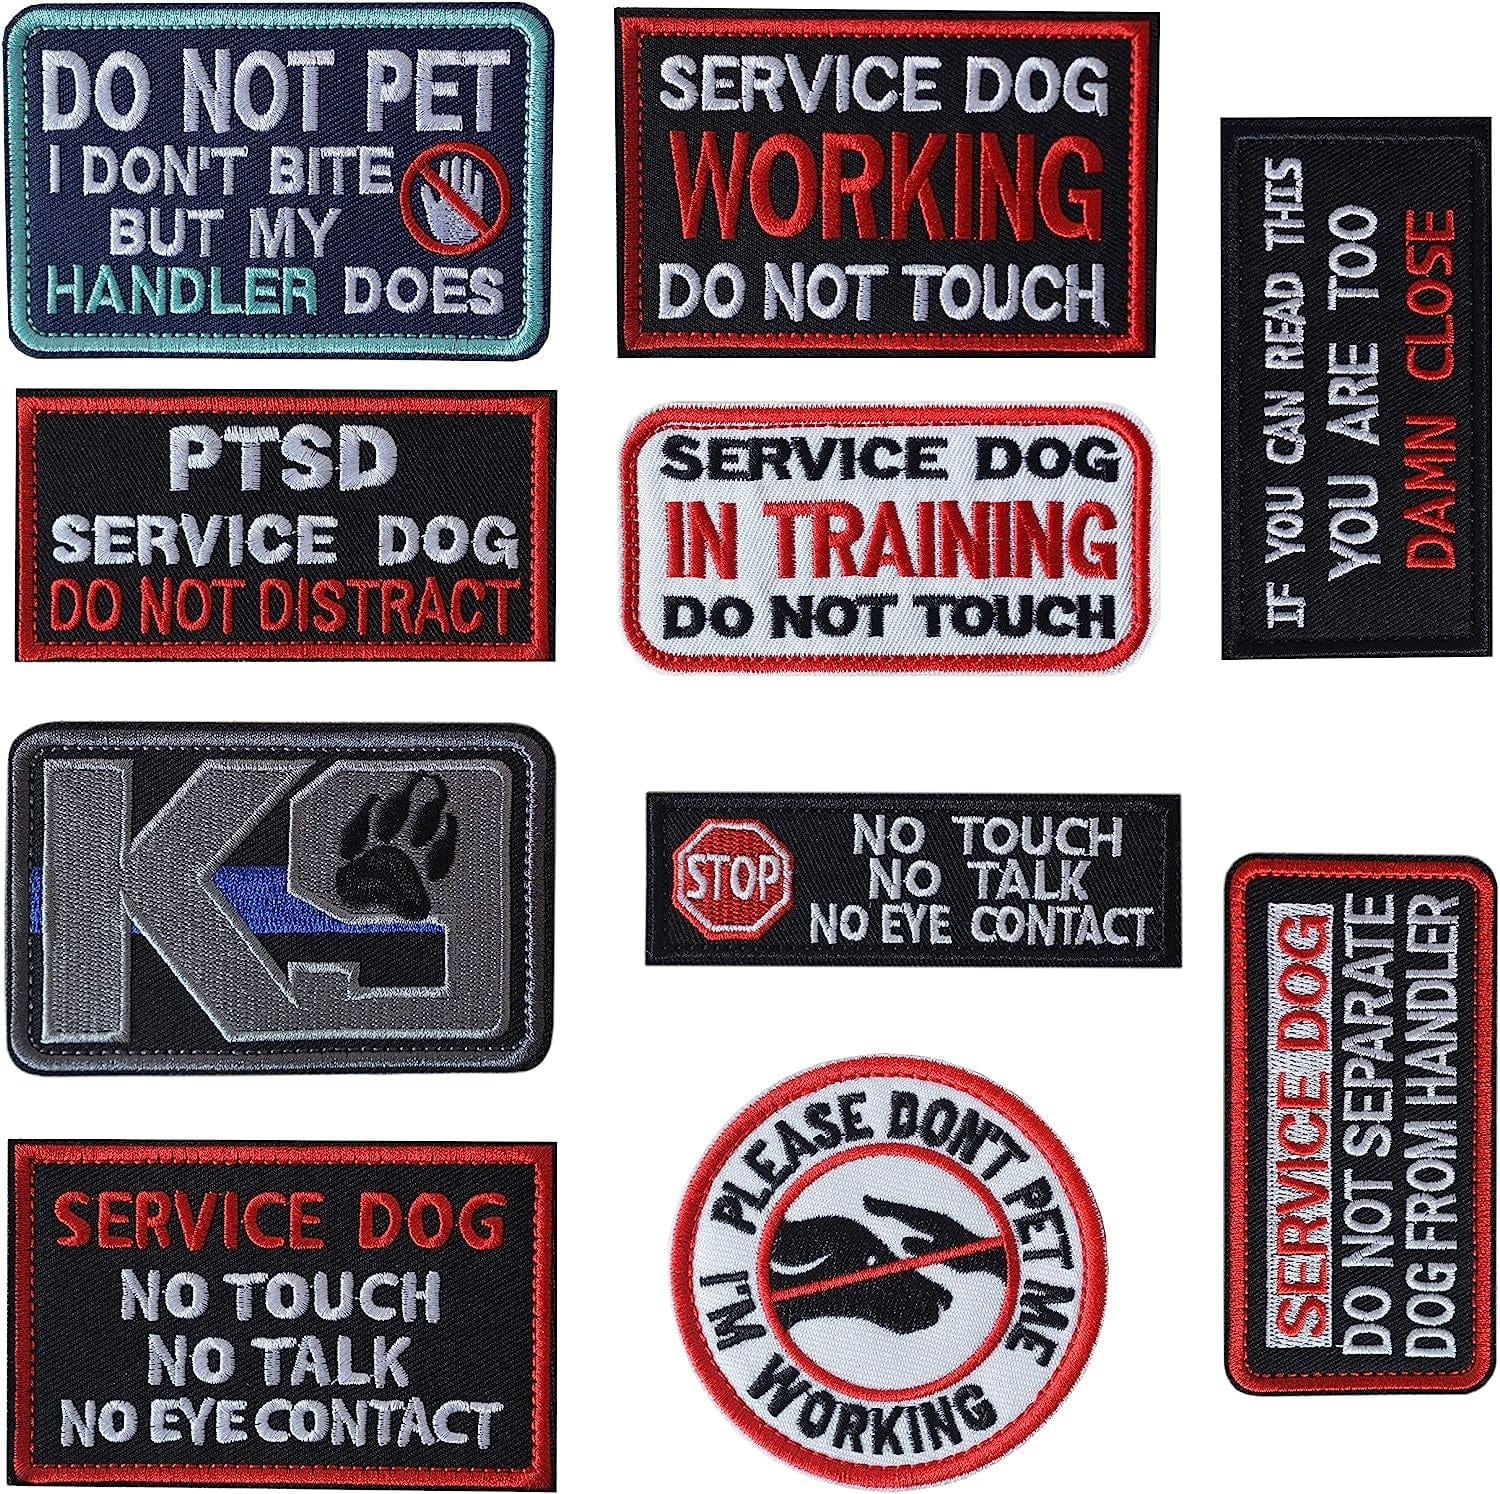 2 Pcs Service Dog Patch for Service Dog Vest | Do Not Pet Patch | Dog Patches for Harness | Patches for Dog Harness | Service Dog Patches with